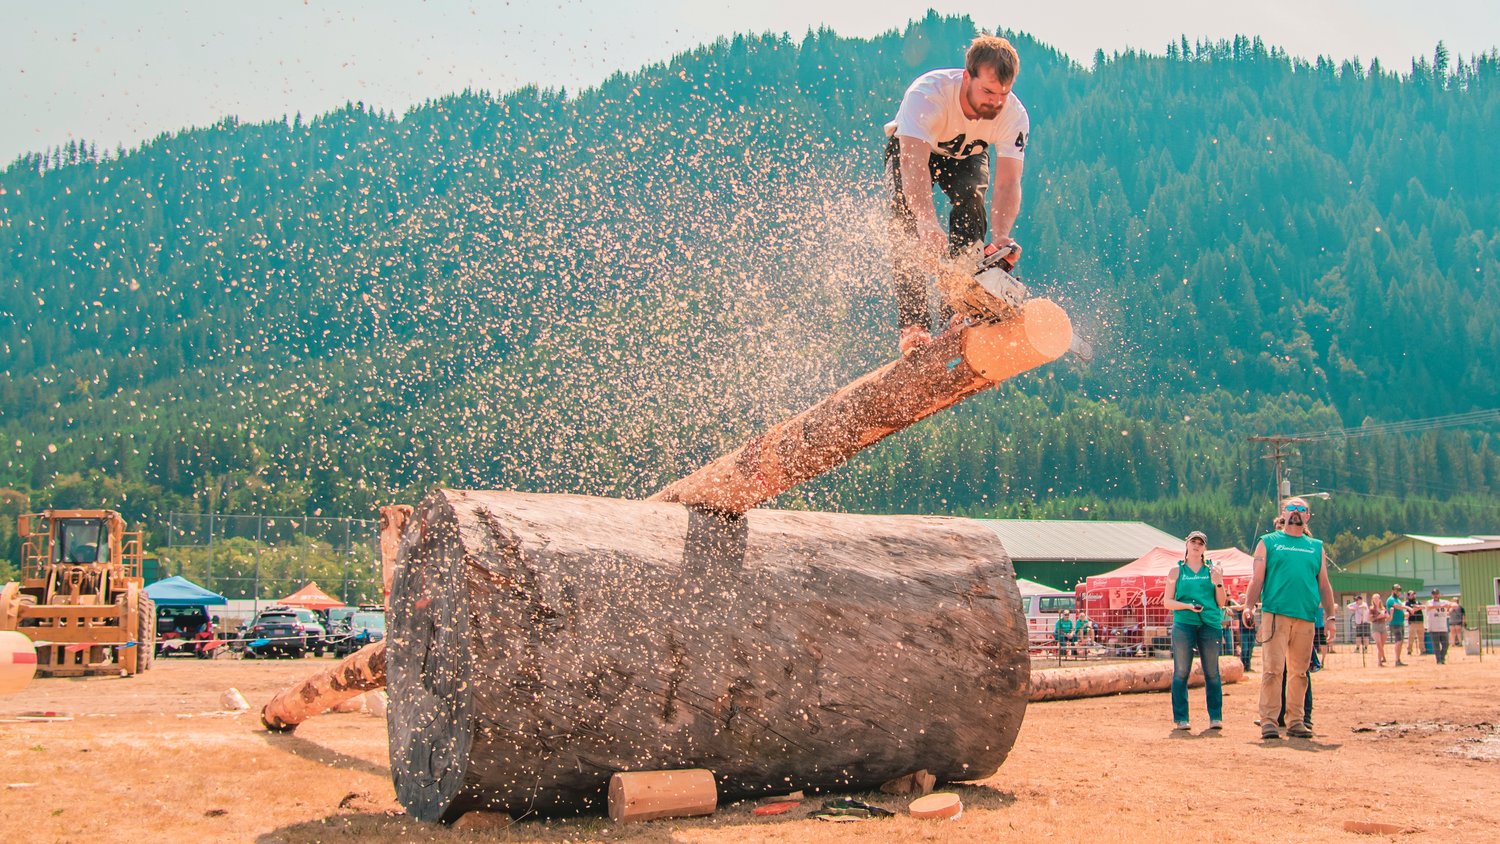 John Parcell uses a chainsaw to saw wood in the obstacle pole event at the Morton Loggers' Jubilee  in August 2021.